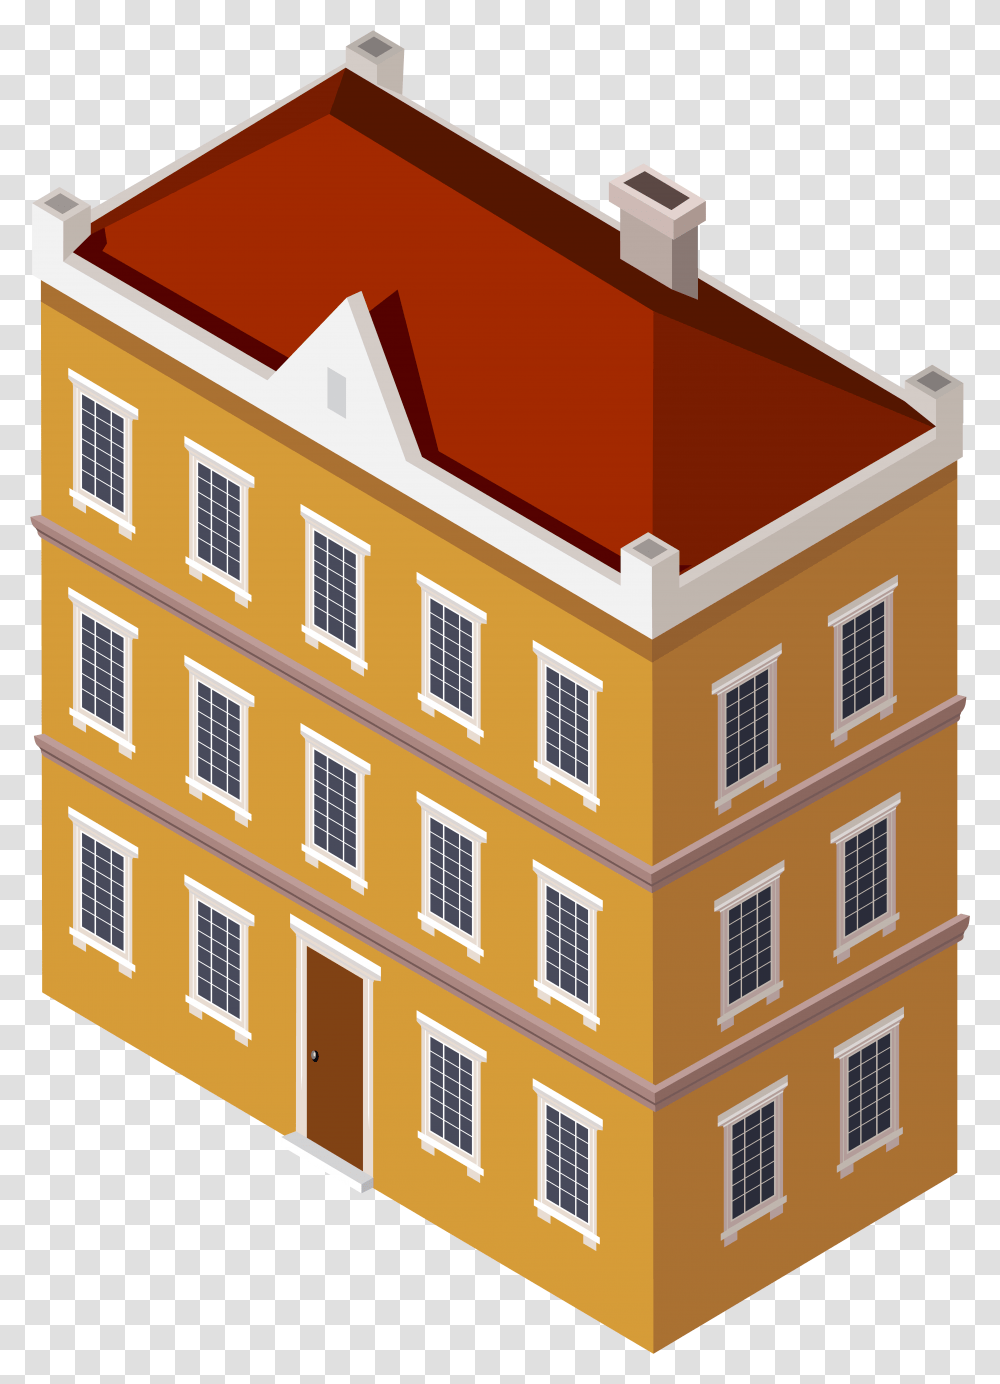 Residential Building With Red Roof Clipart Building Clipart, Window, Scoreboard, Urban, Housing Transparent Png